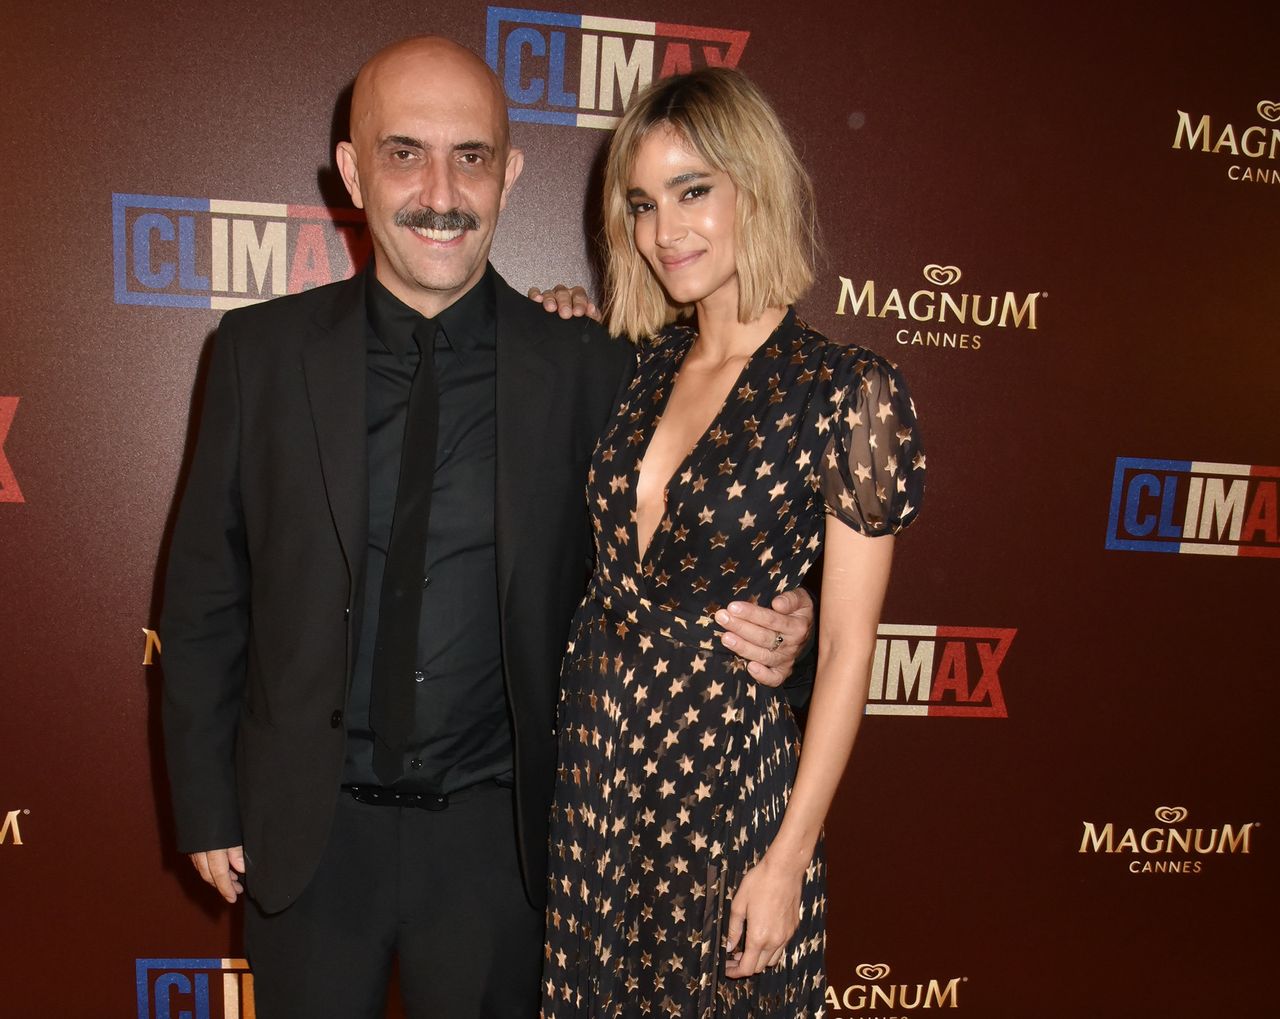 Gaspar Noé and Boutella at the Cannes Film Festival in May 2018.